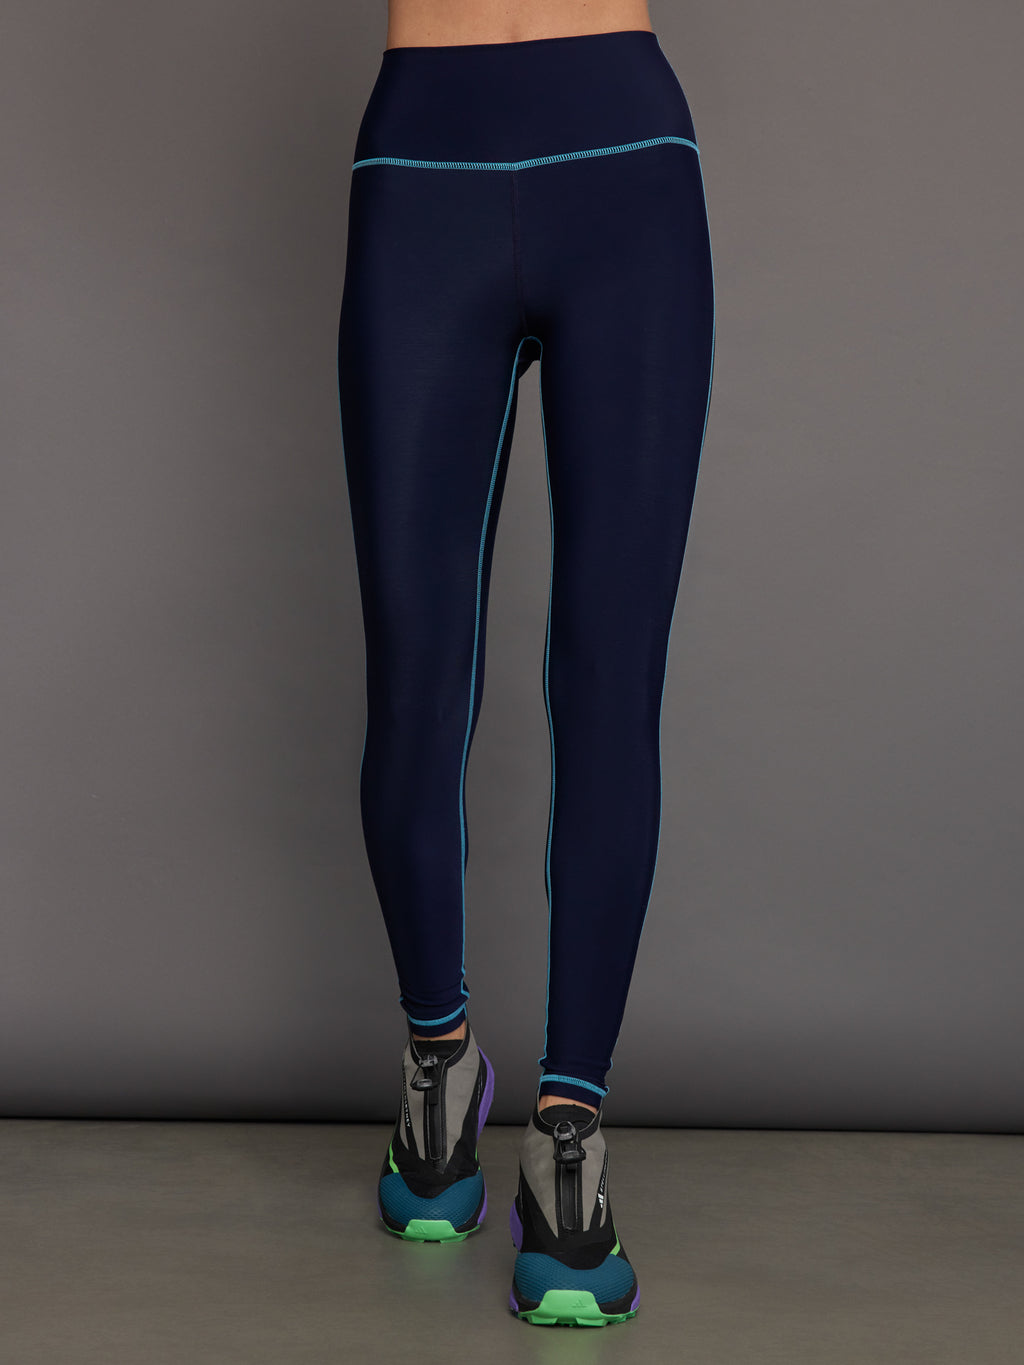 City Ready Running Tights Leggings in Black by Nike from Carbon38